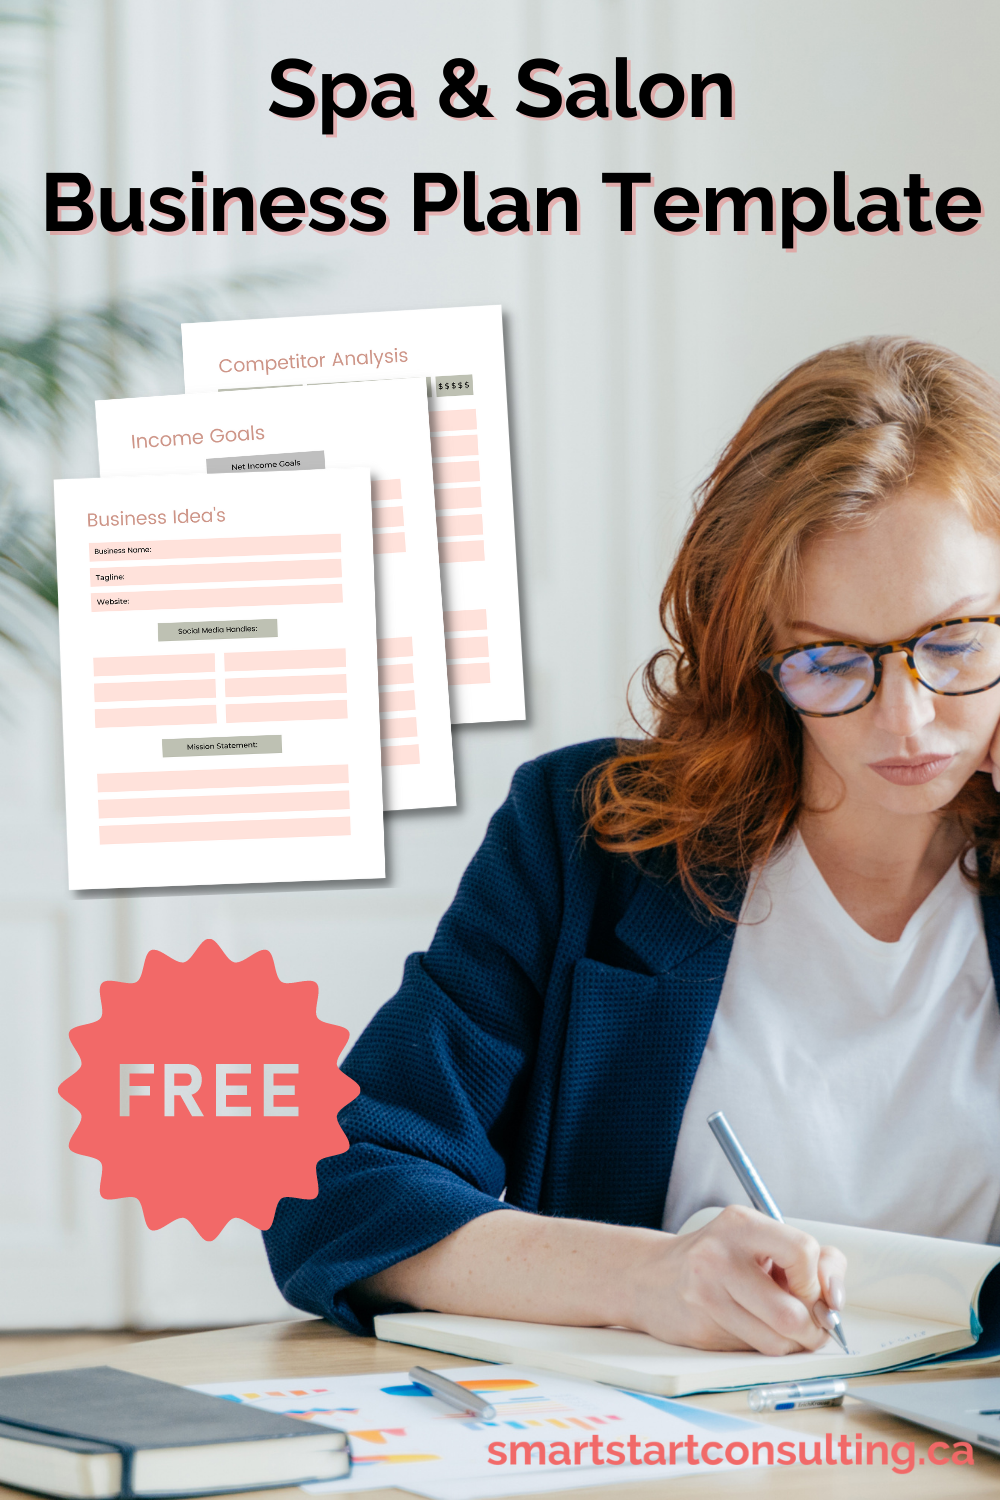 Free business plan template For estheticians, nail techs, lash techs, brow artists, skin specialists and more.